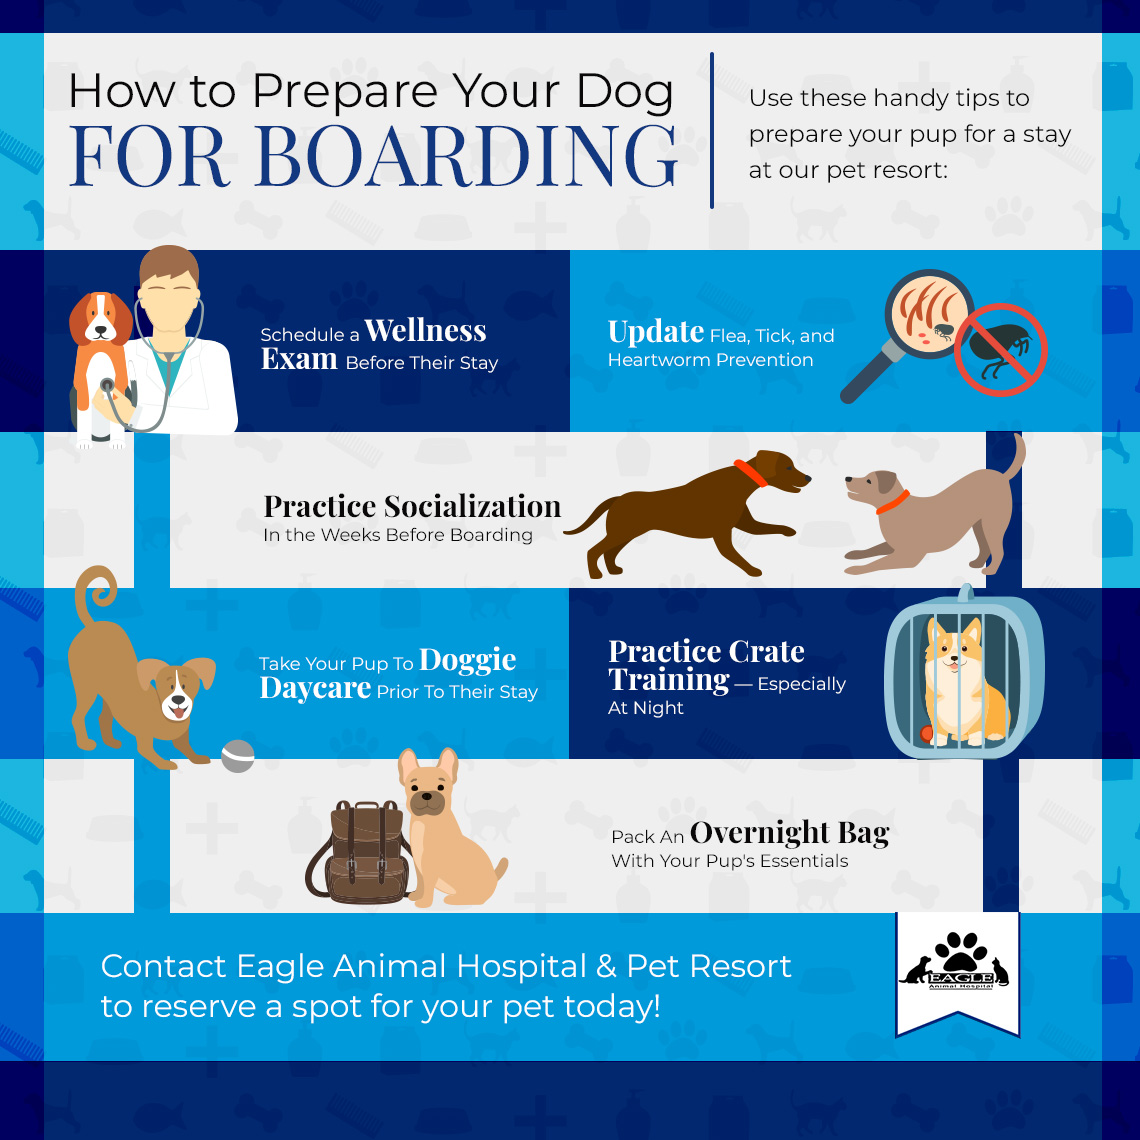 Infographic showing how to prepare your dag before boarding